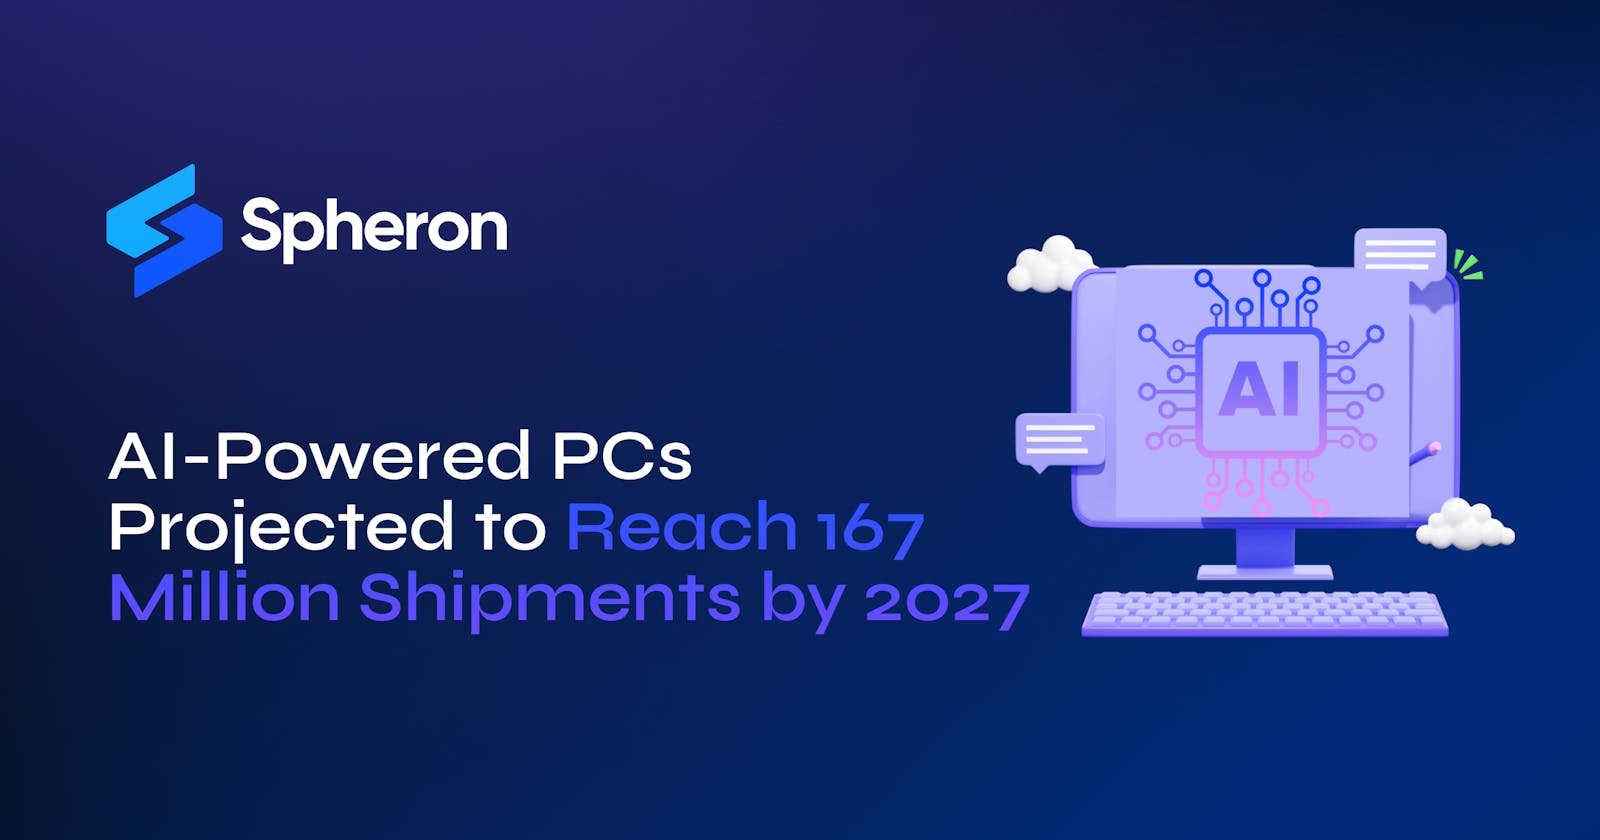 AI-Powered PCs Projected to Reach 167 Million Shipments by 2027